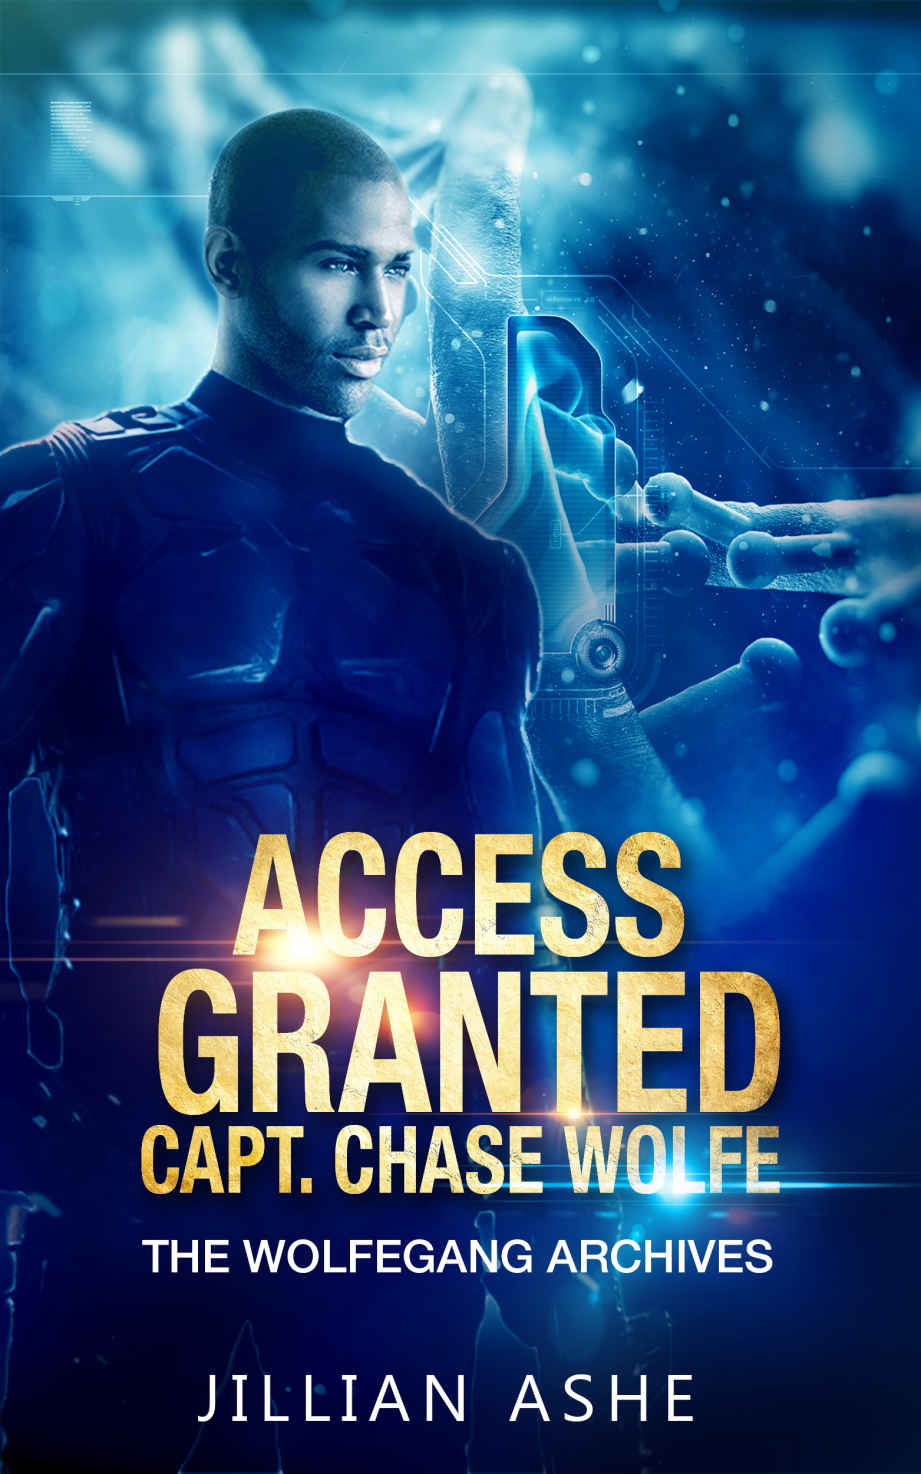 Access Granted: Wolfegang Archives: Capt. Chase Wolfe